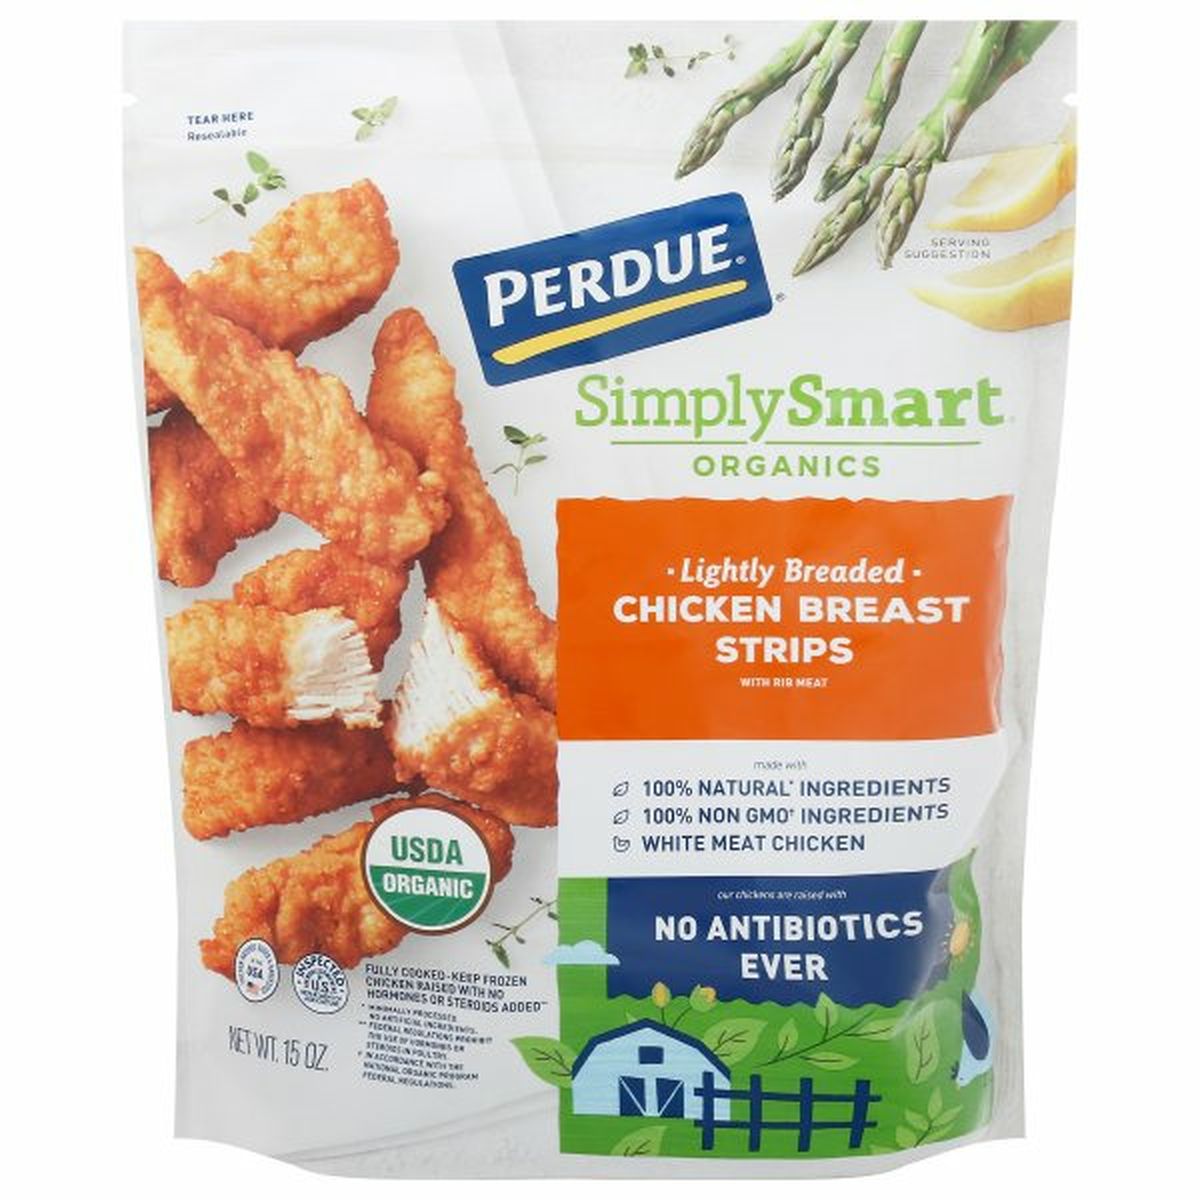 Calories in Perdue Simply Smart Chicken Breast Strips, Organic, Lightly Breaded